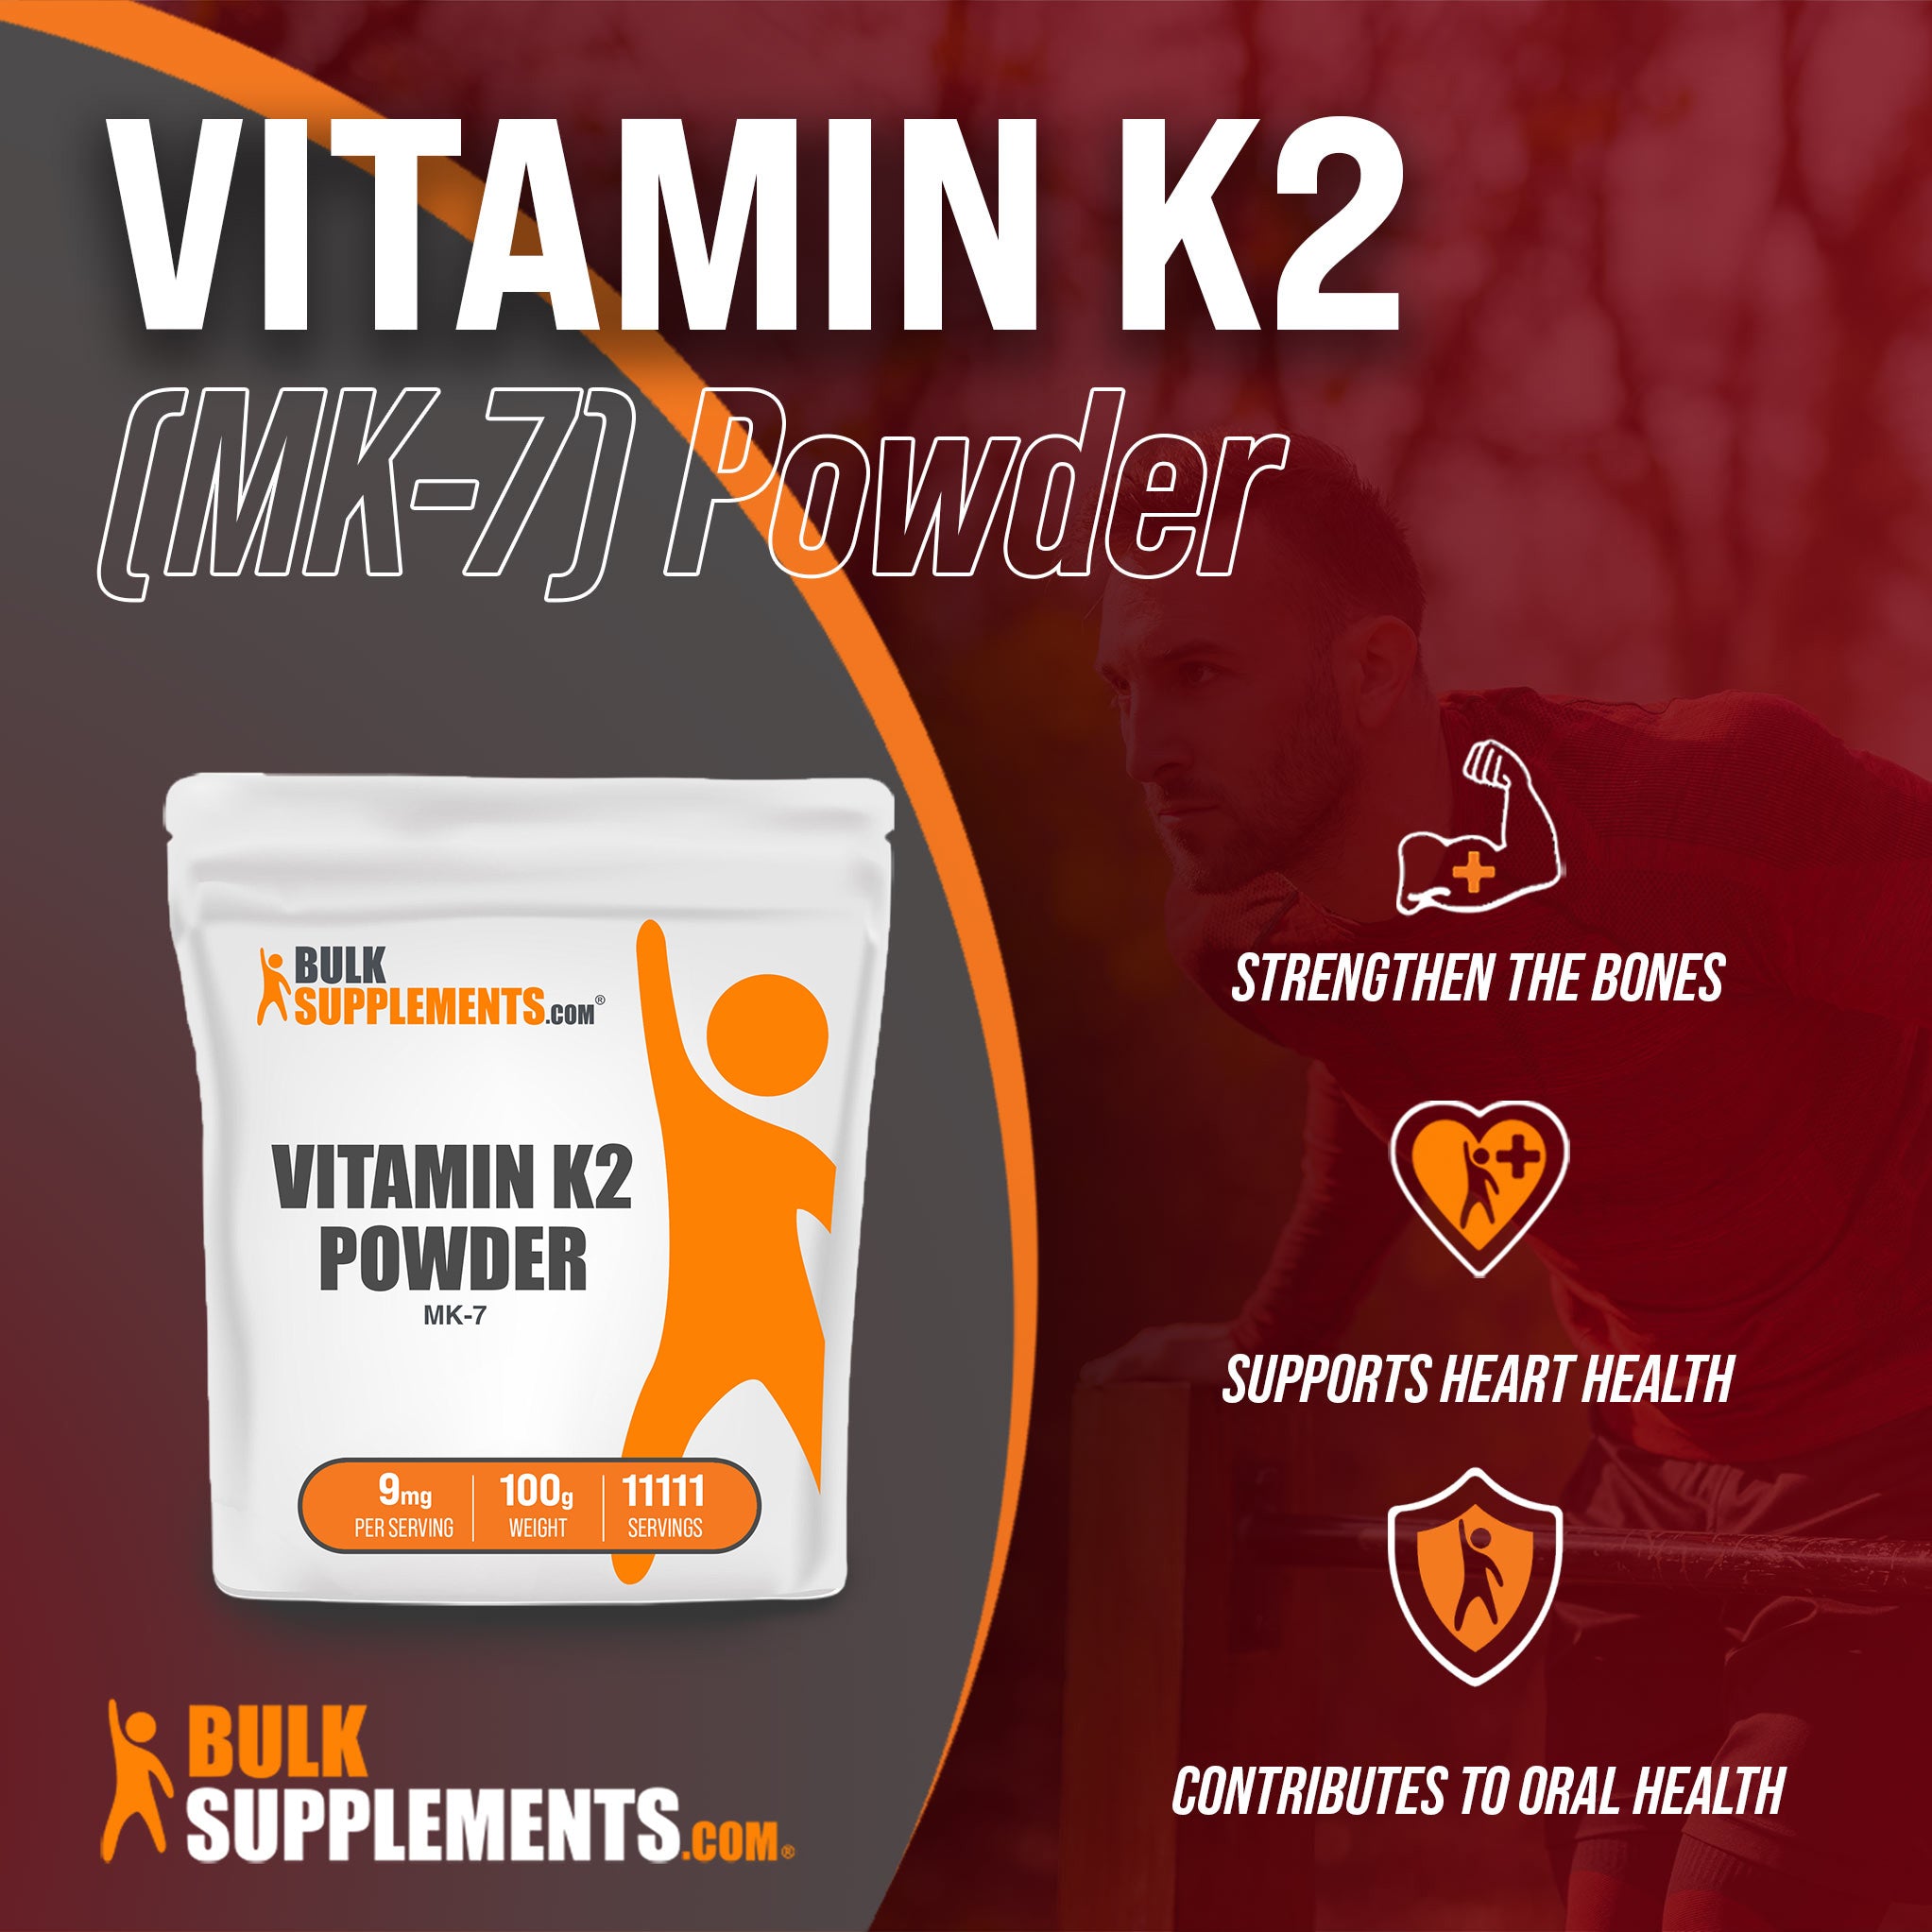 Benefits of Vitamin K2 MK7: strengthen the bones, supports heart health, contributes to oral health